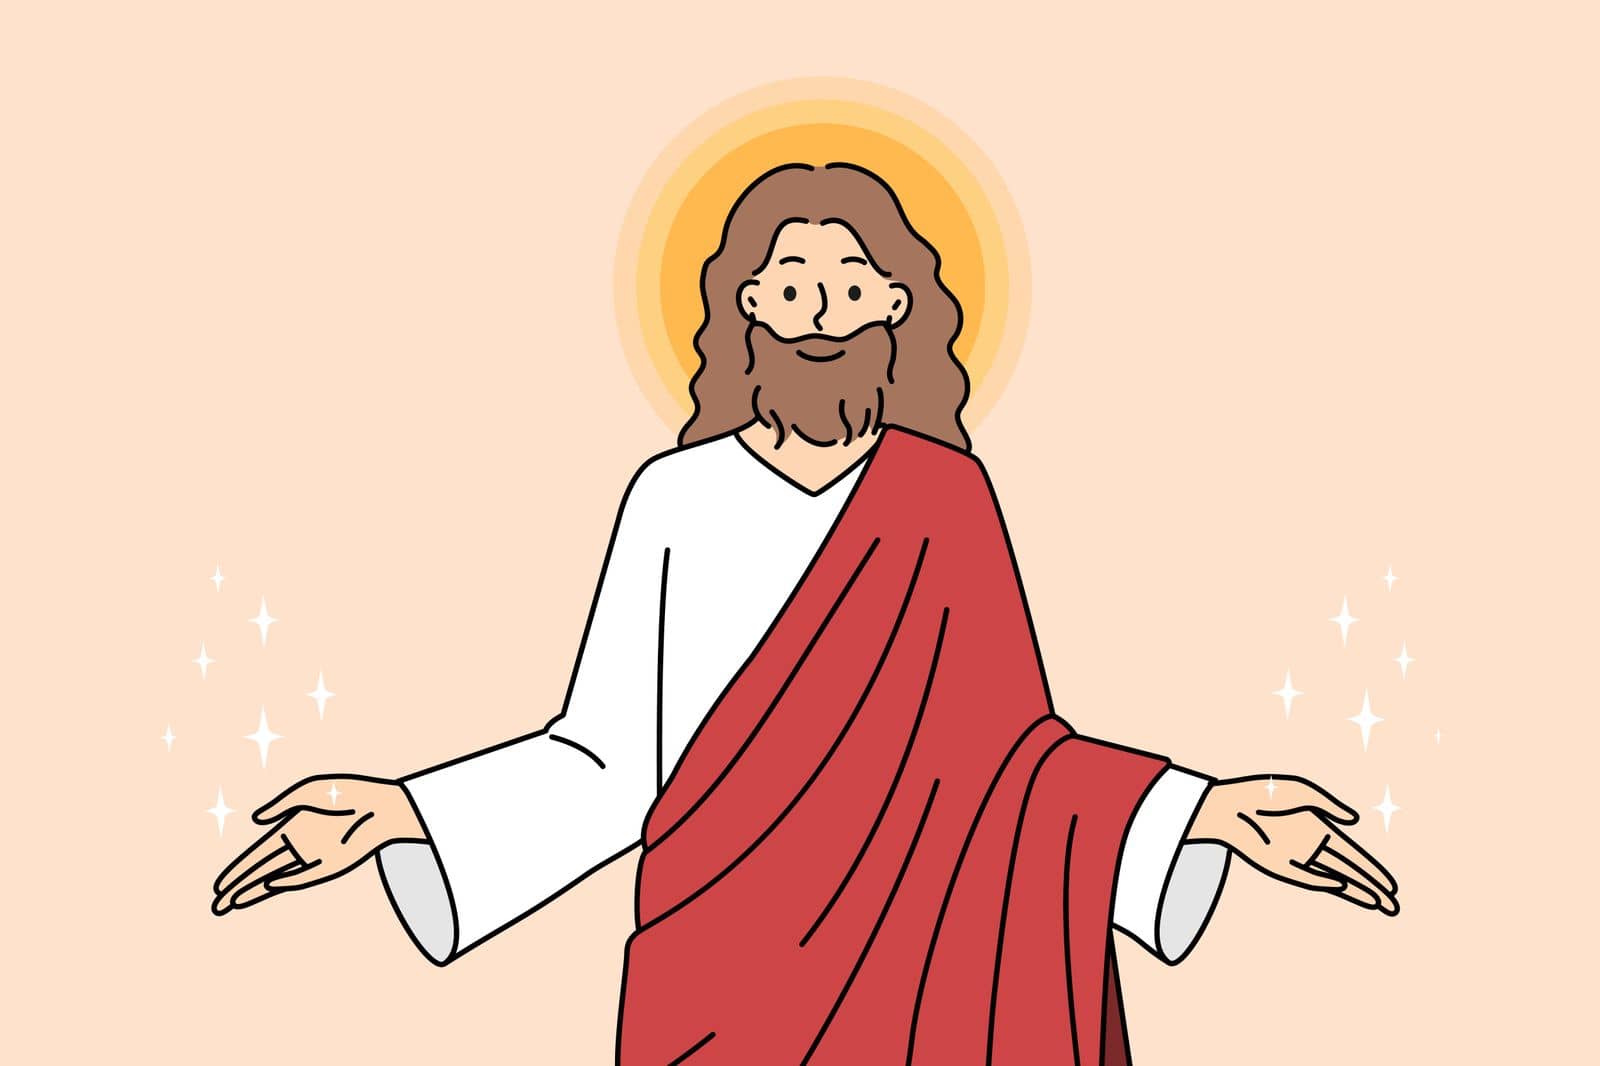 Jesus Christ stretch hands welcome believers. God send share love and protection to people. Religion and faith. Vector illustration.